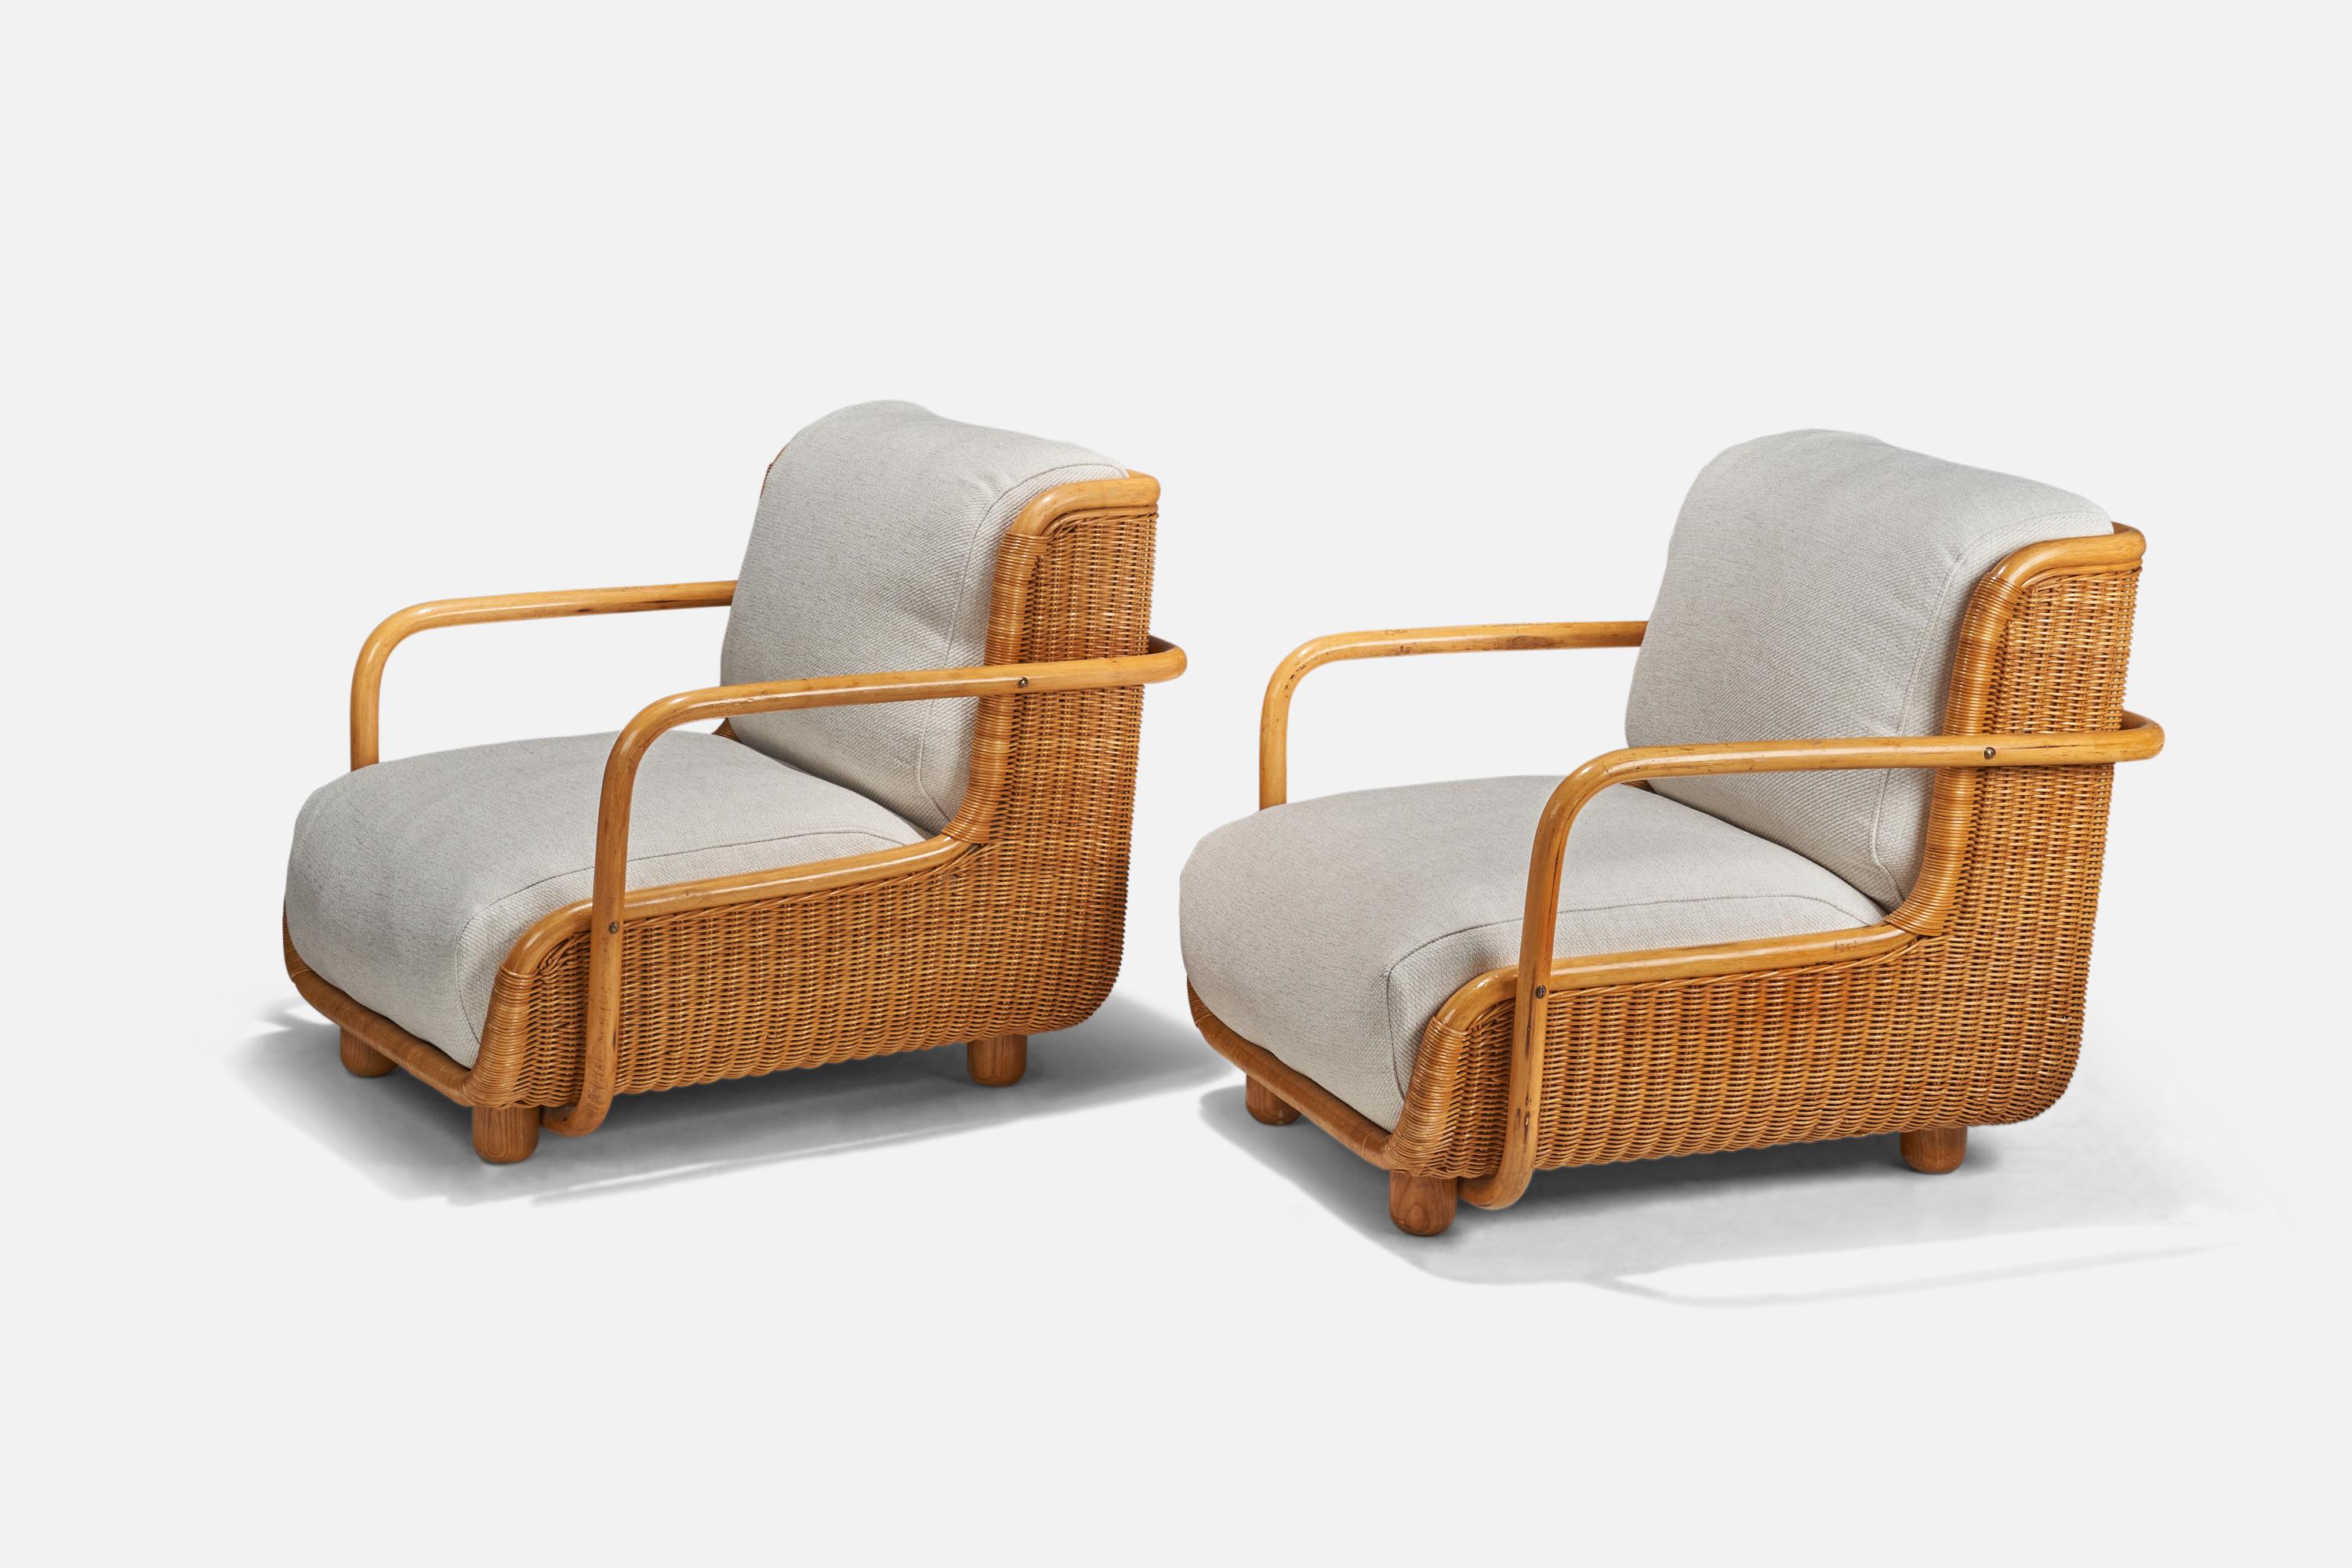 A pair of wood, rattan and fabric lounge chairs, design attributed to Paolo Buffa, Italy, 1940s.